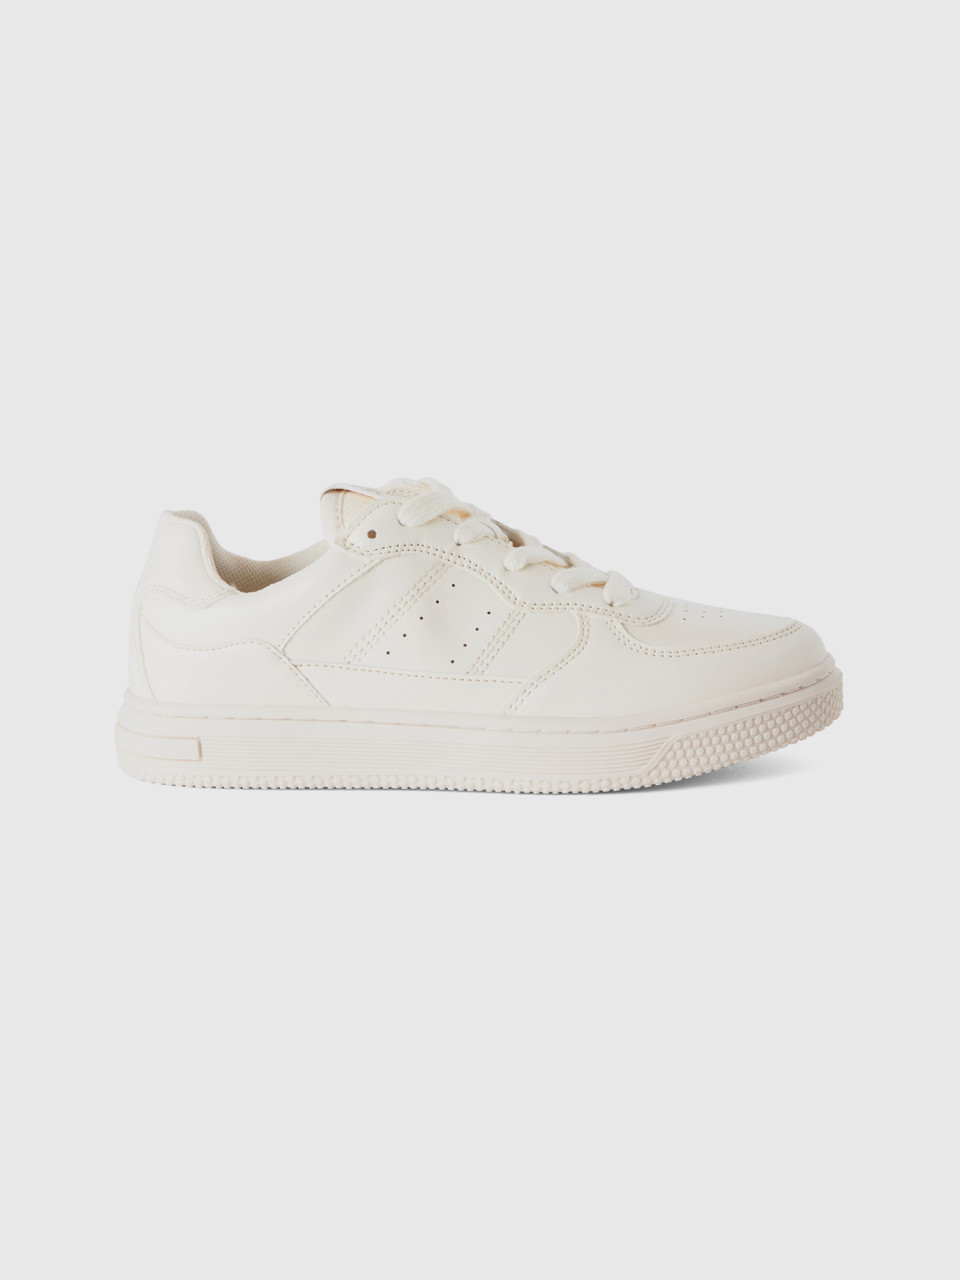 Benetton, Low-top Sneakers In Imitation Leather, Creamy White, Kids